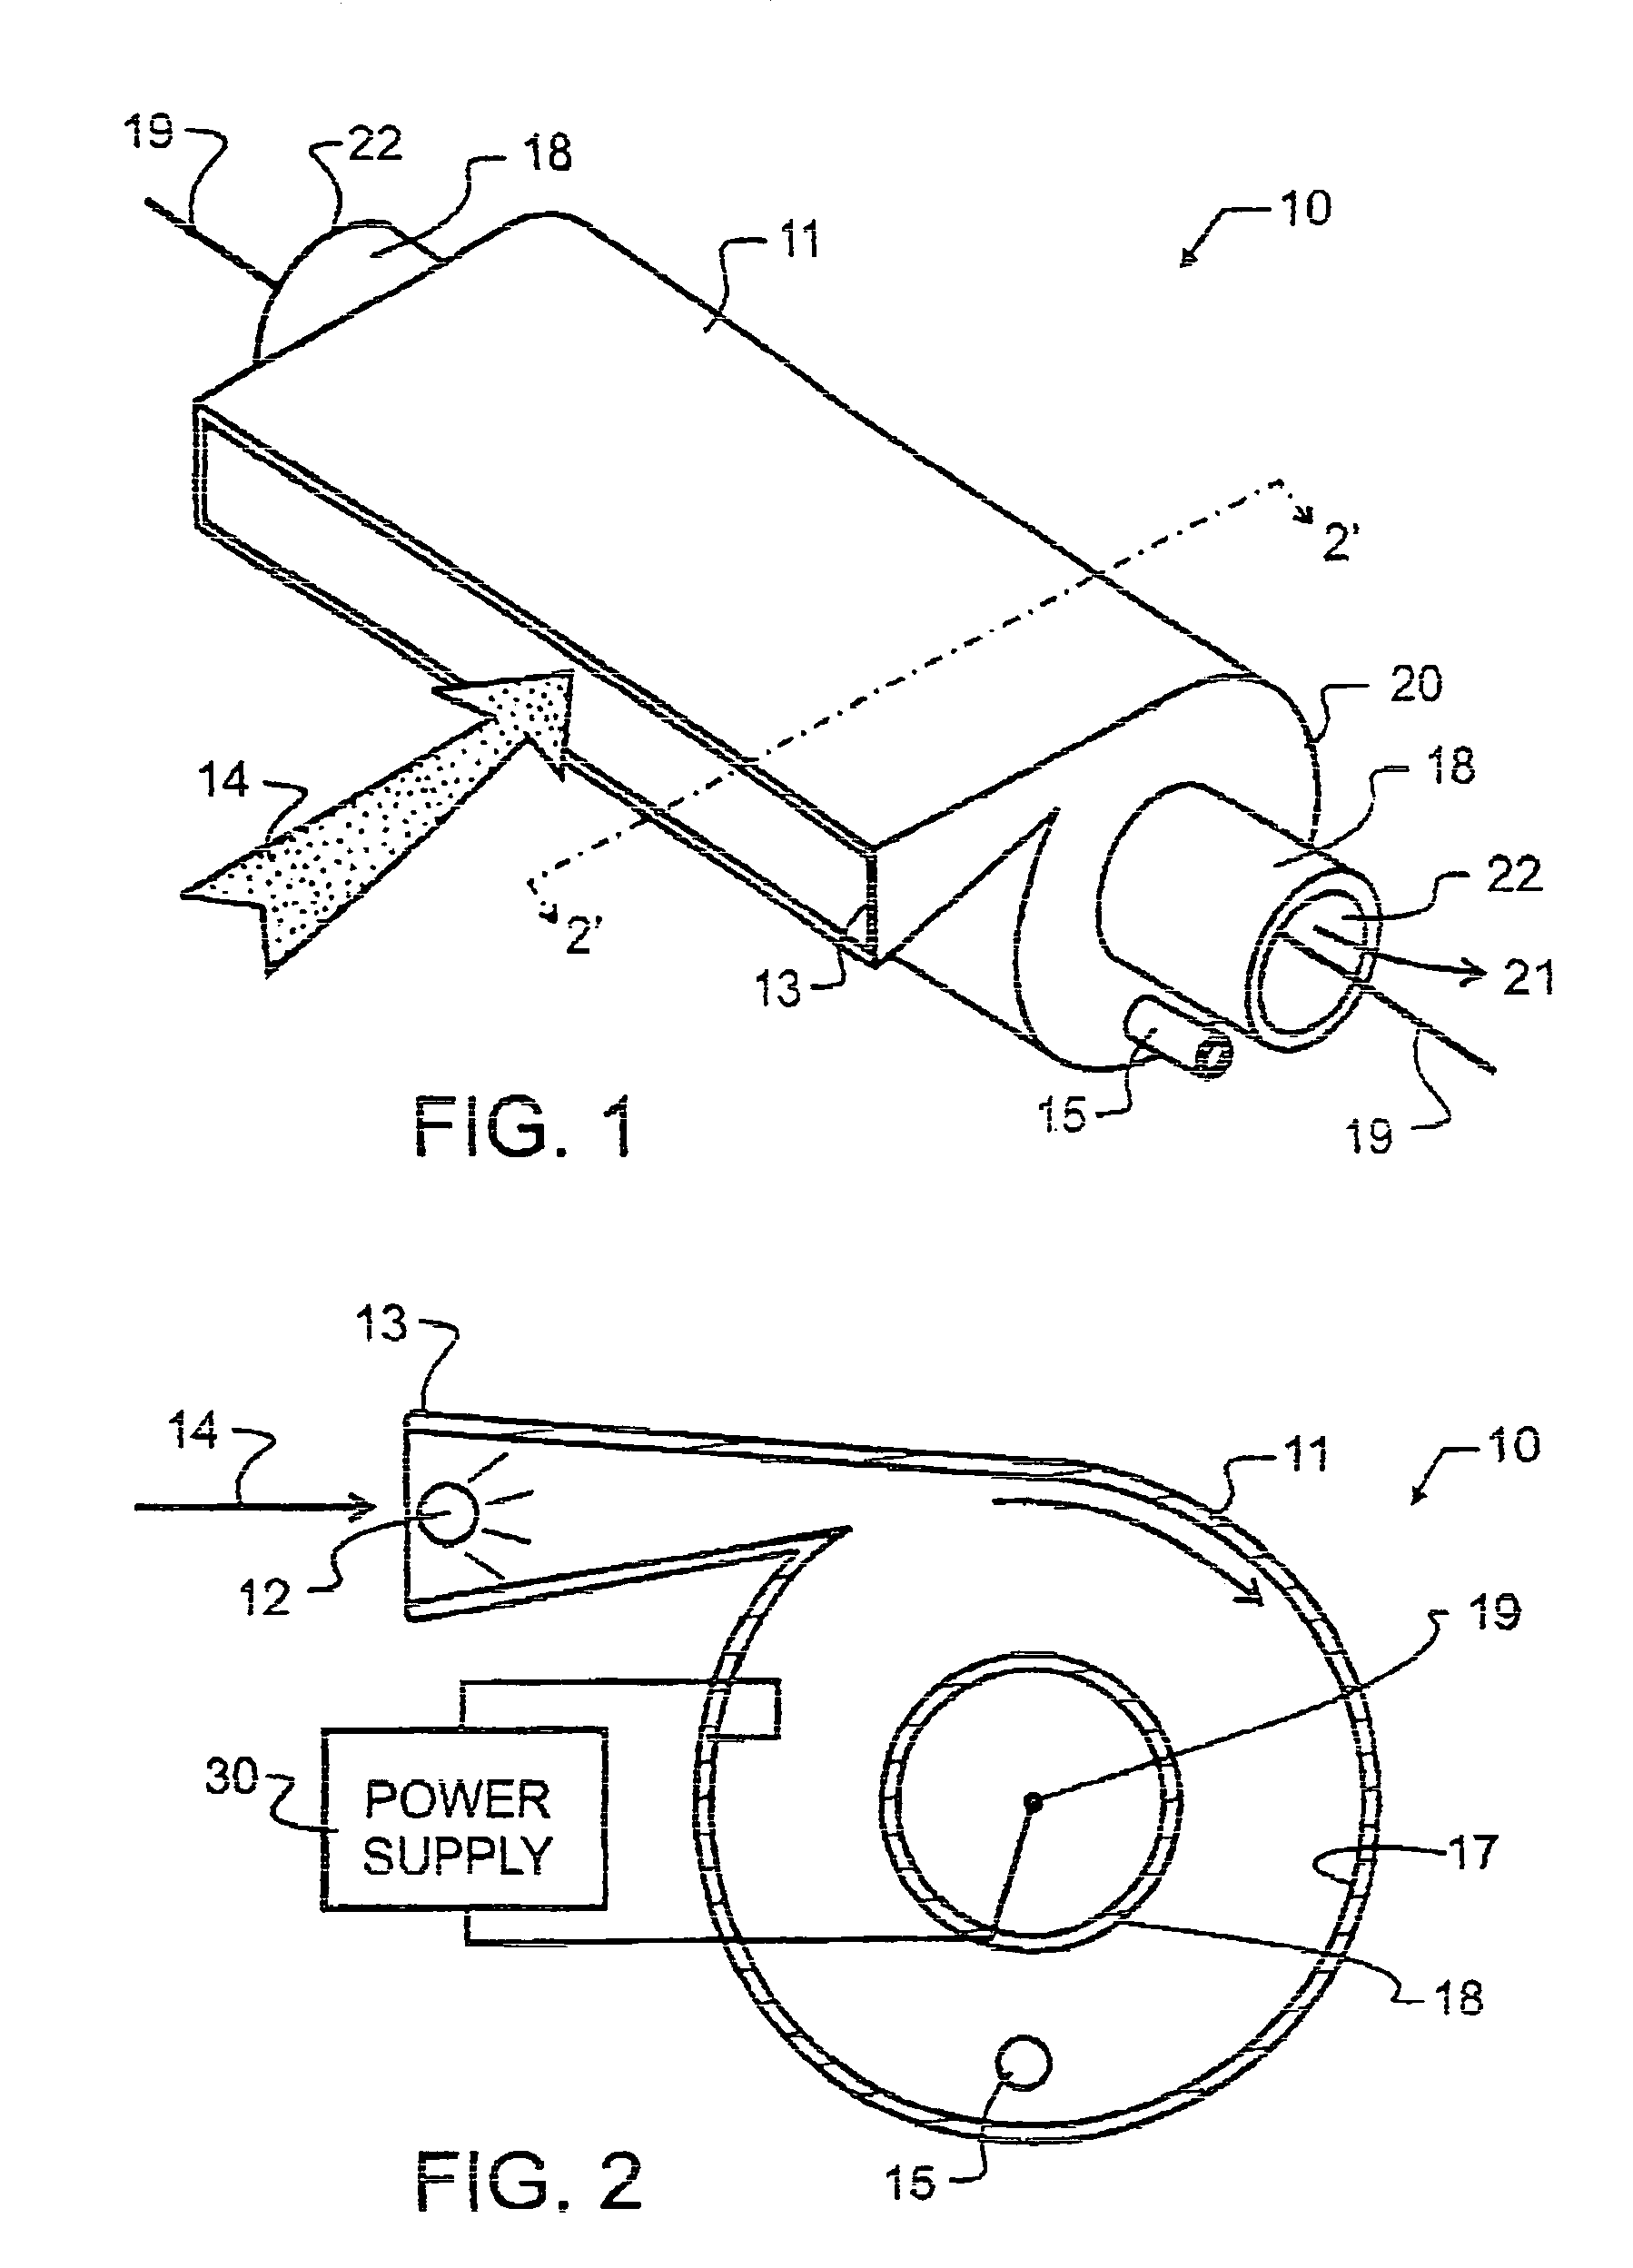 Wet electro-core gas particulate separator